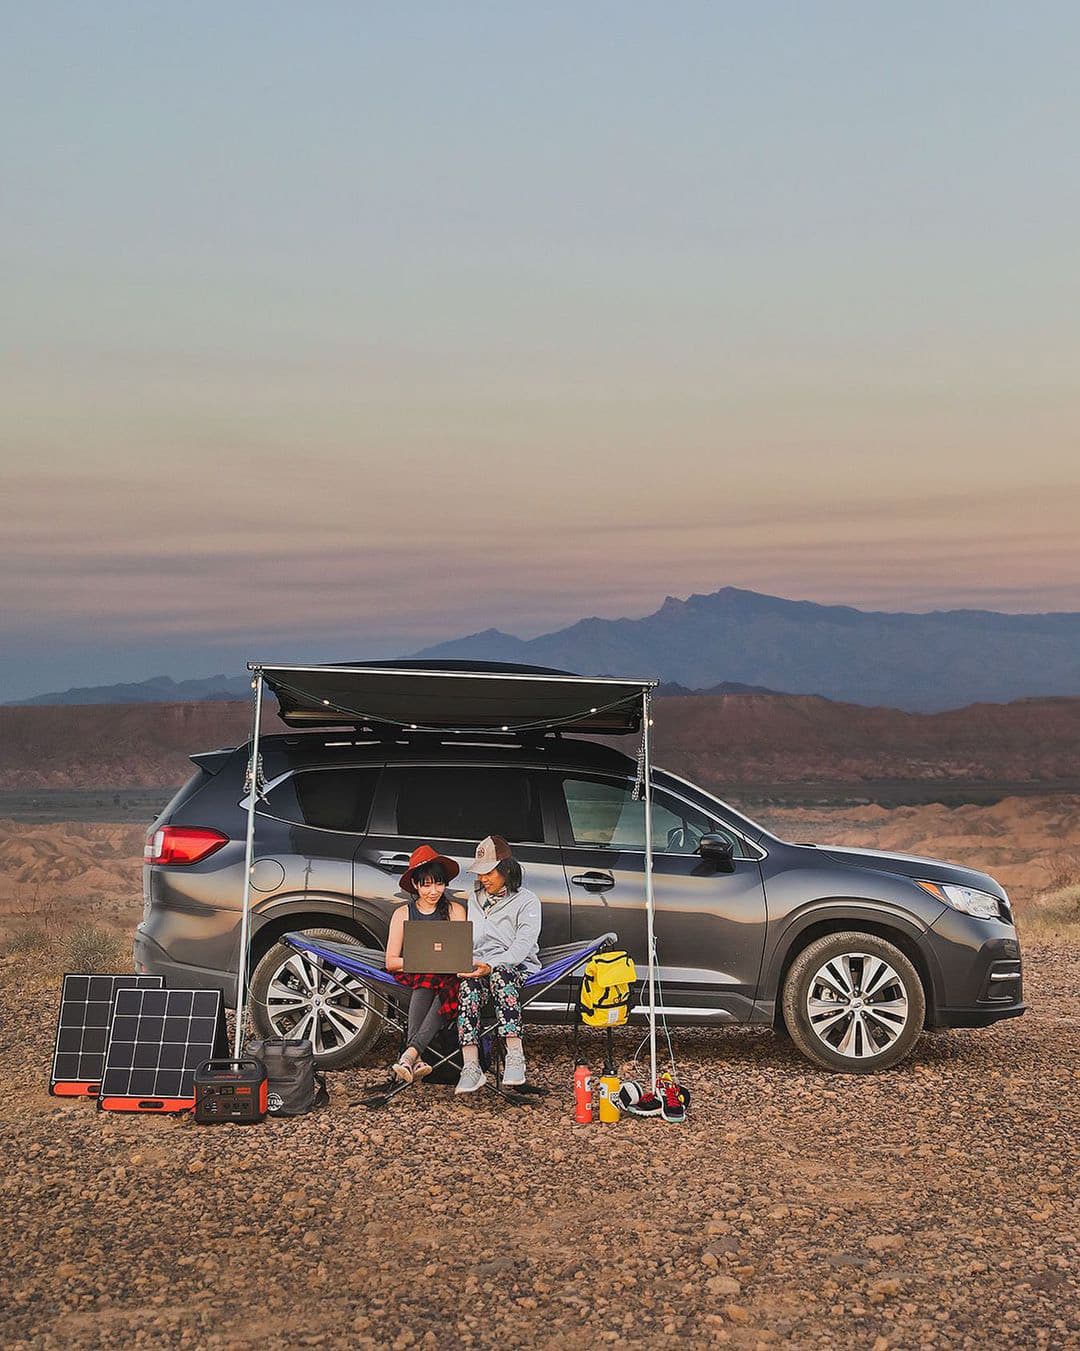 21 Car Camping Essentials - Everything You Need to Pack